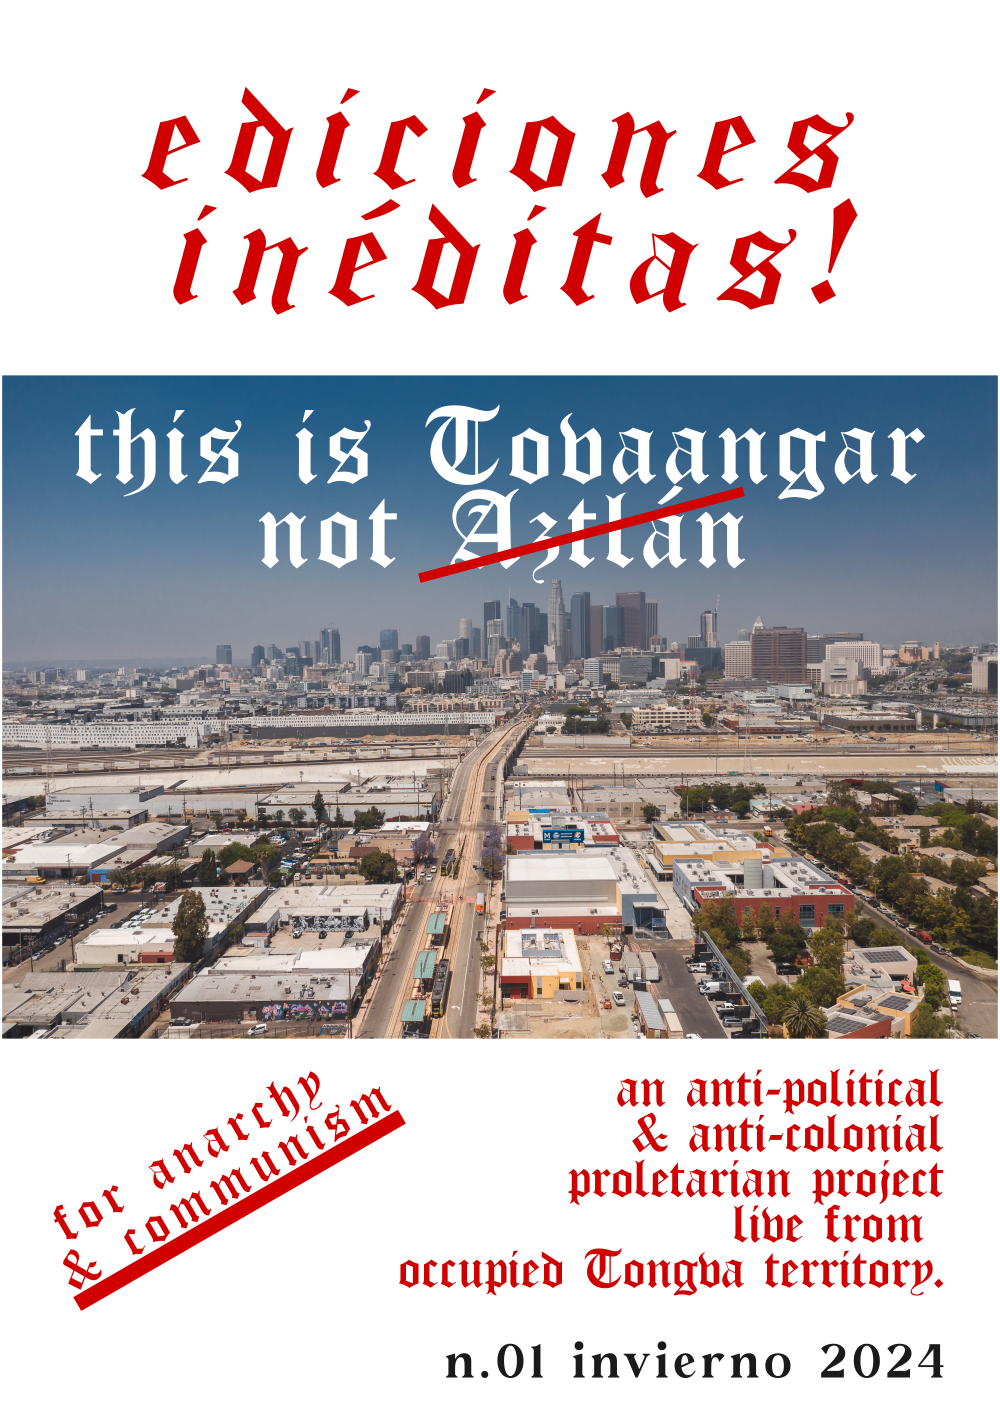 A legal-size title page. Over white background sits a sky view photography of Los Angeles downtown skyline from the east. Above this photograph is red Old English text which reads as "ediciones inéditas!". Overlayed over the above photograph is white Old English text which reads as "This is Tonvaangar not Aztlán". A red bar cuts across the word Aztlán at a diagonal. Below this photograph is red Old English text, at a skew which reads, "for anarchy & communism." To the right of this is more red Old English text which reads as "an anti-political & anti-colonial proletarian project live from occupied Tongva territory." Below this is black Cabolafe text which reads as "n.01 invierno 2024."